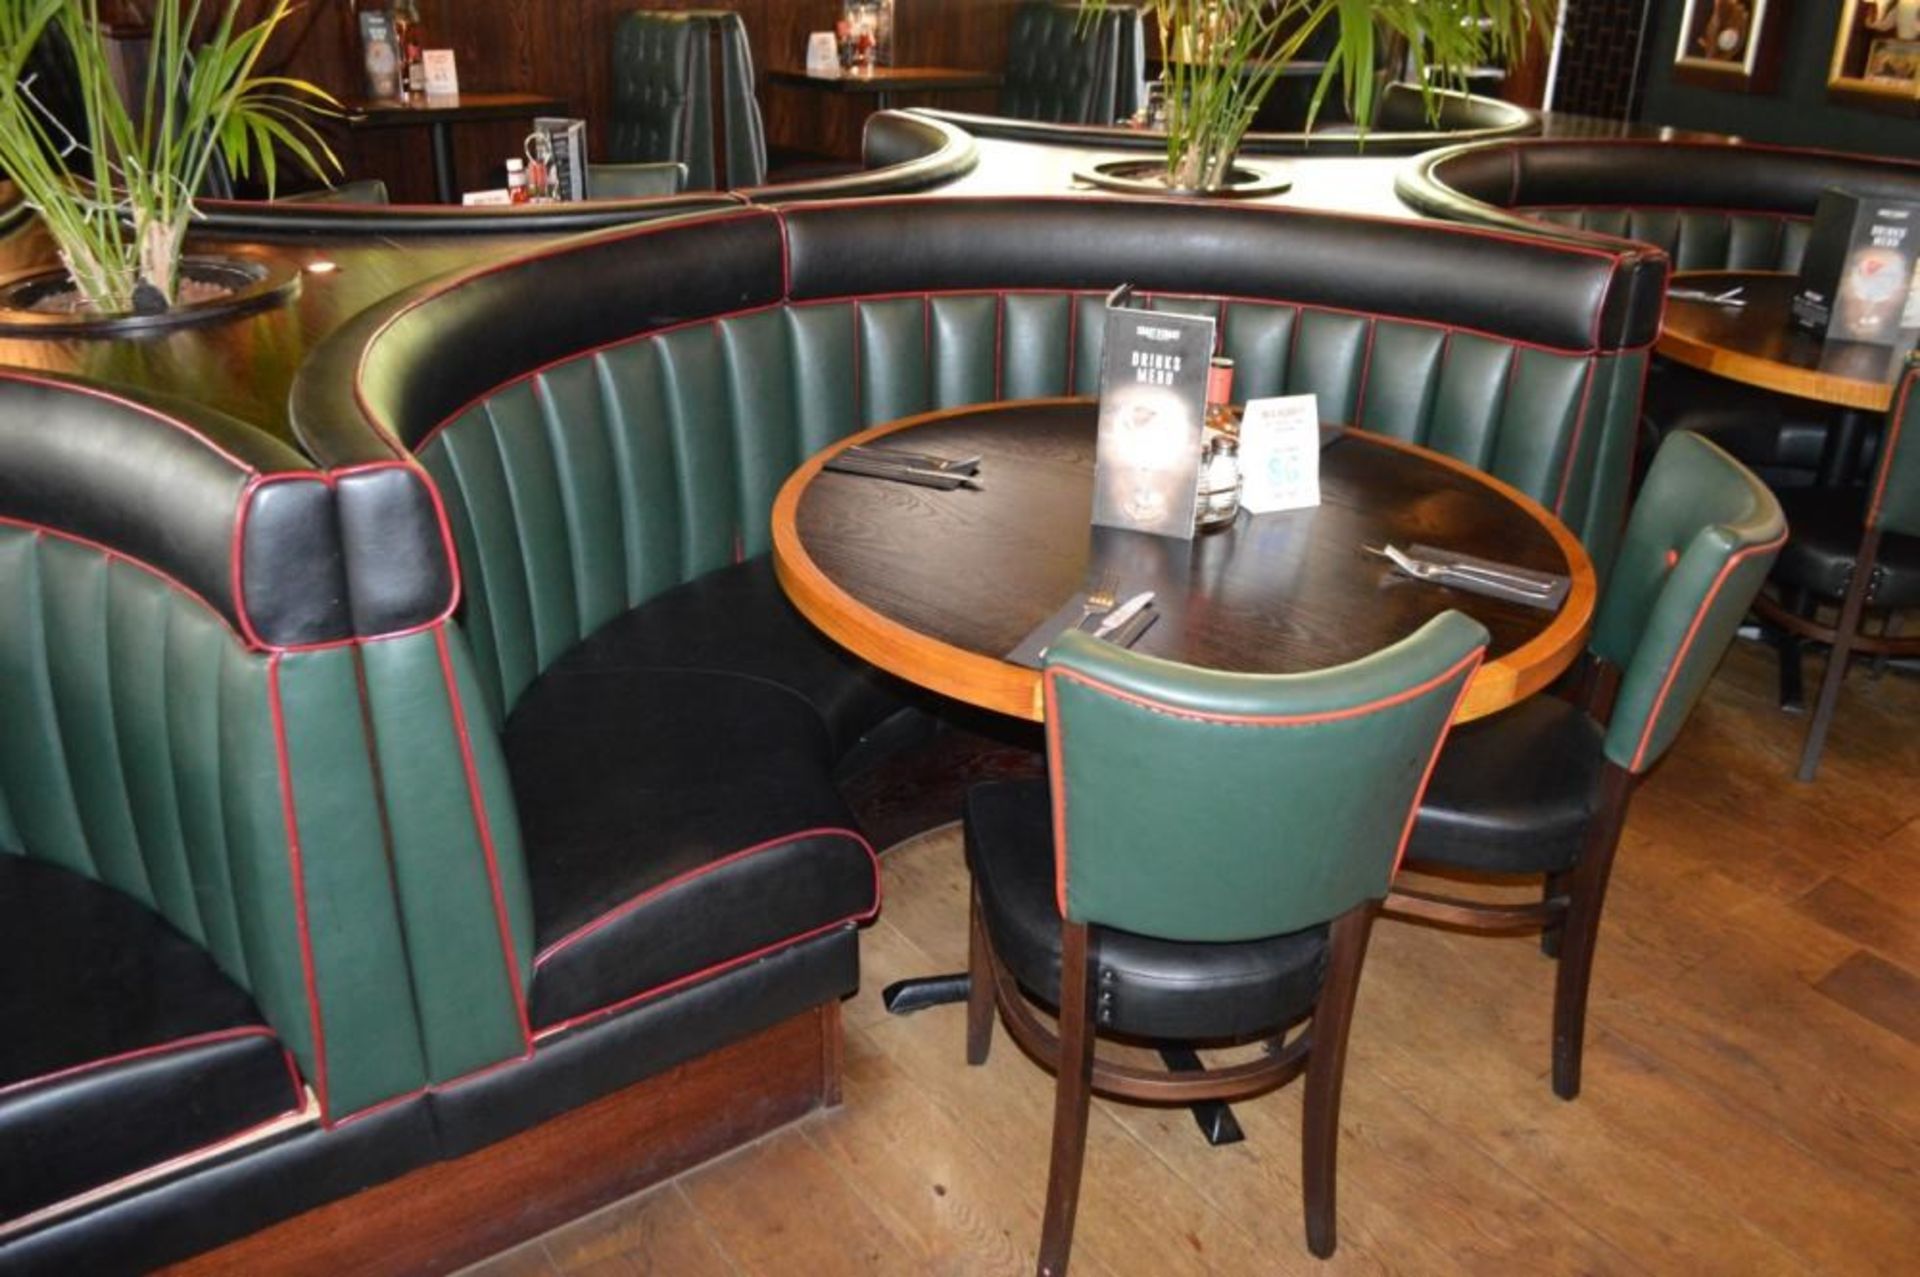 1 x Contemporary Half Circle Seating Booth - Features a Leather Upholstery in Green and Black,